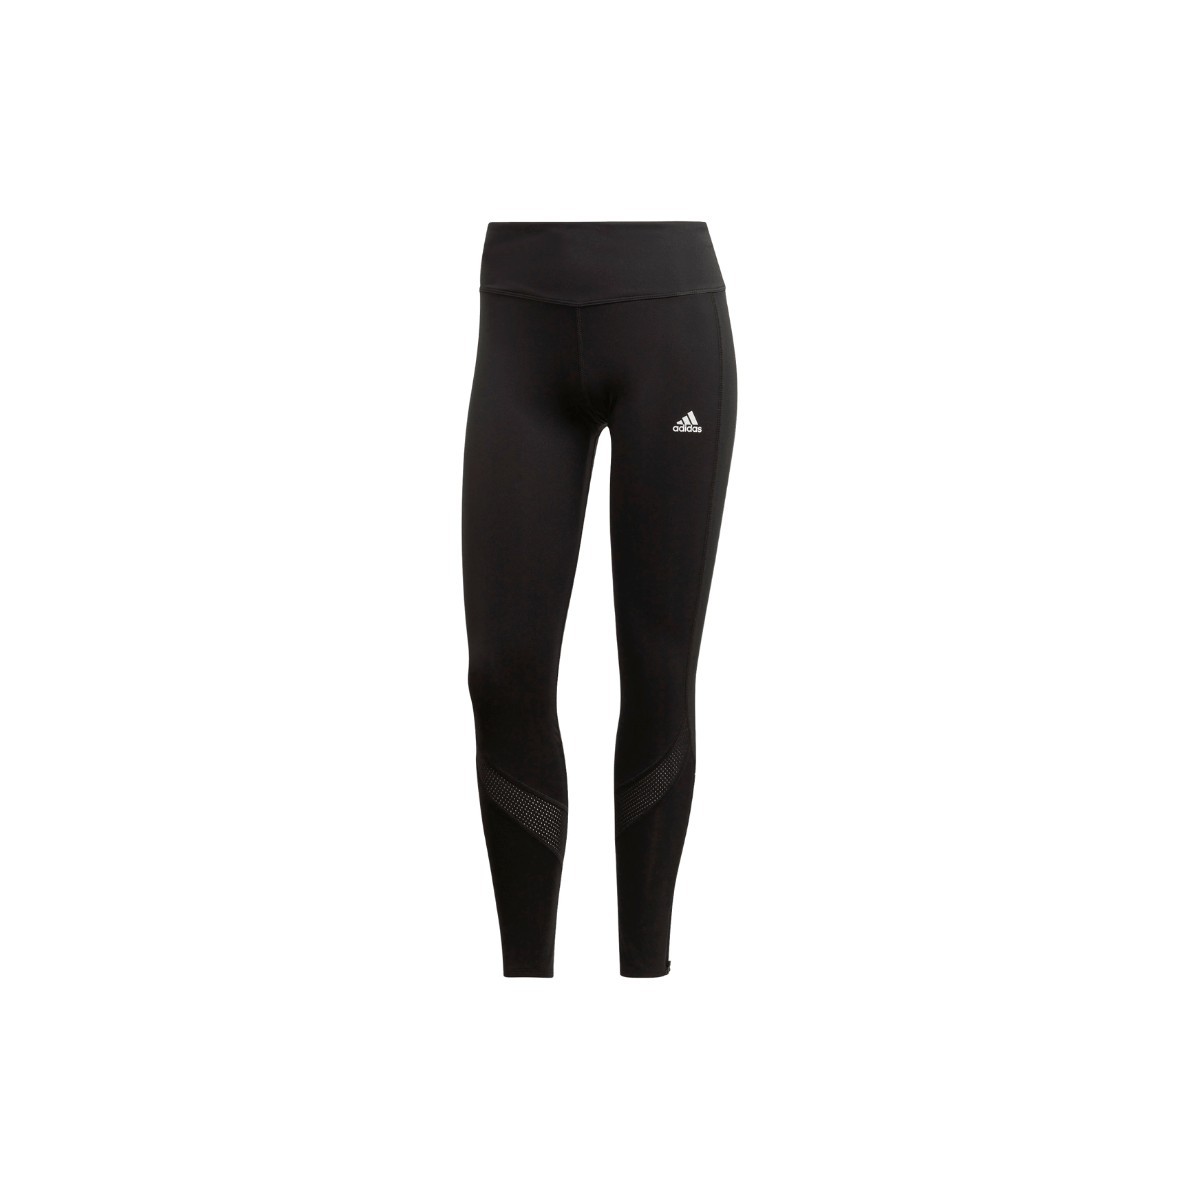 Collants Adidas Own the Run TGT Noir Femme SS21, Taille XS.